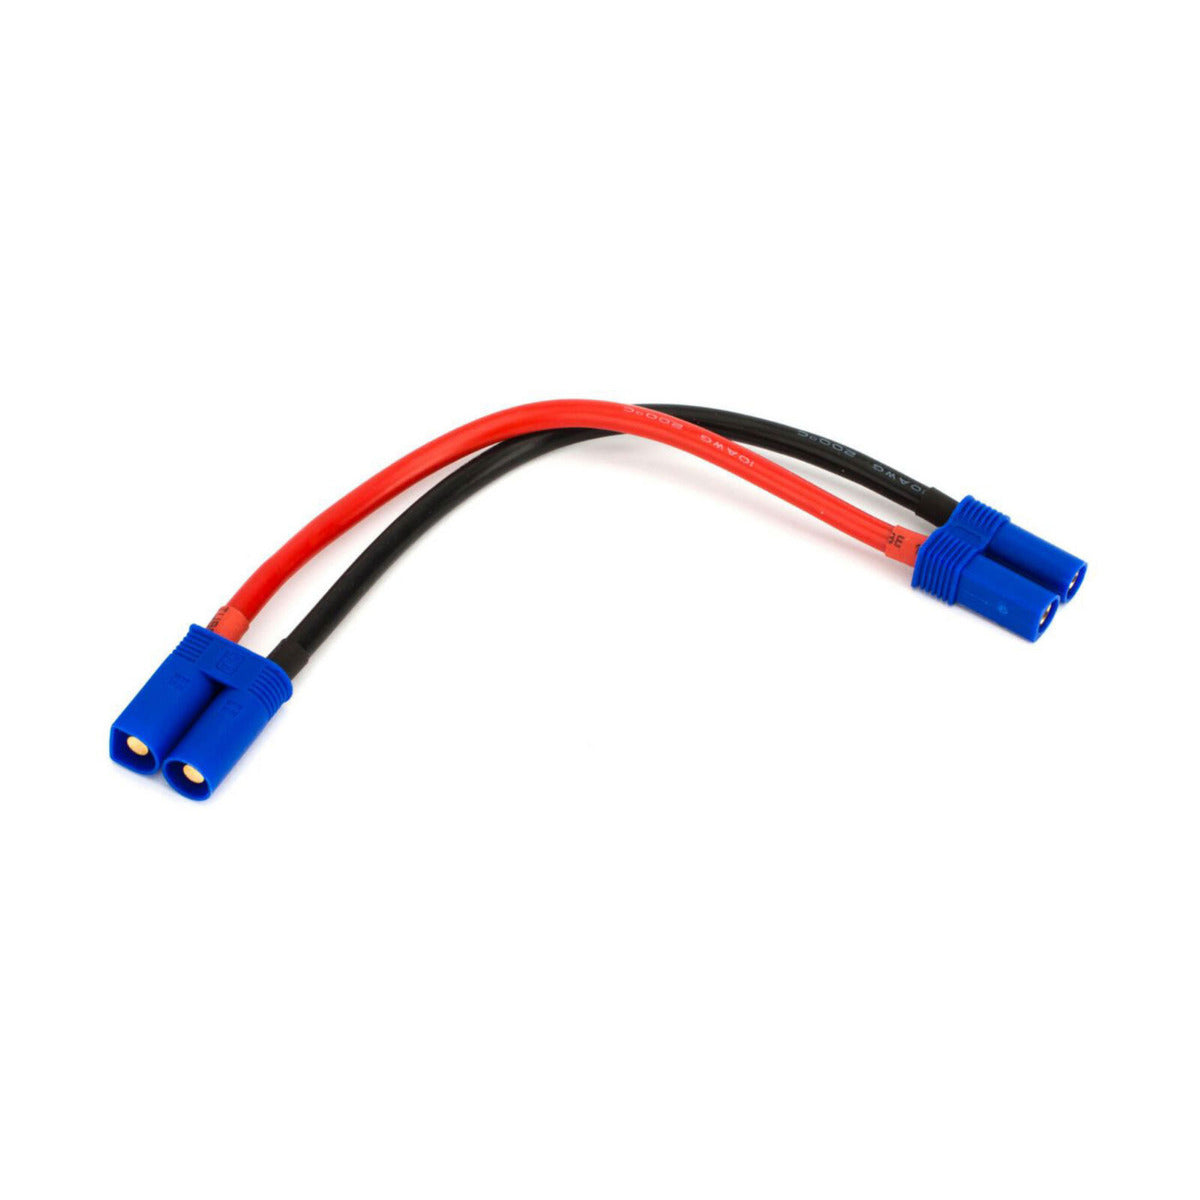 Powerhobby Extension Lead EC5 with 6" Wire 10 AWG Male / Female - PowerHobby